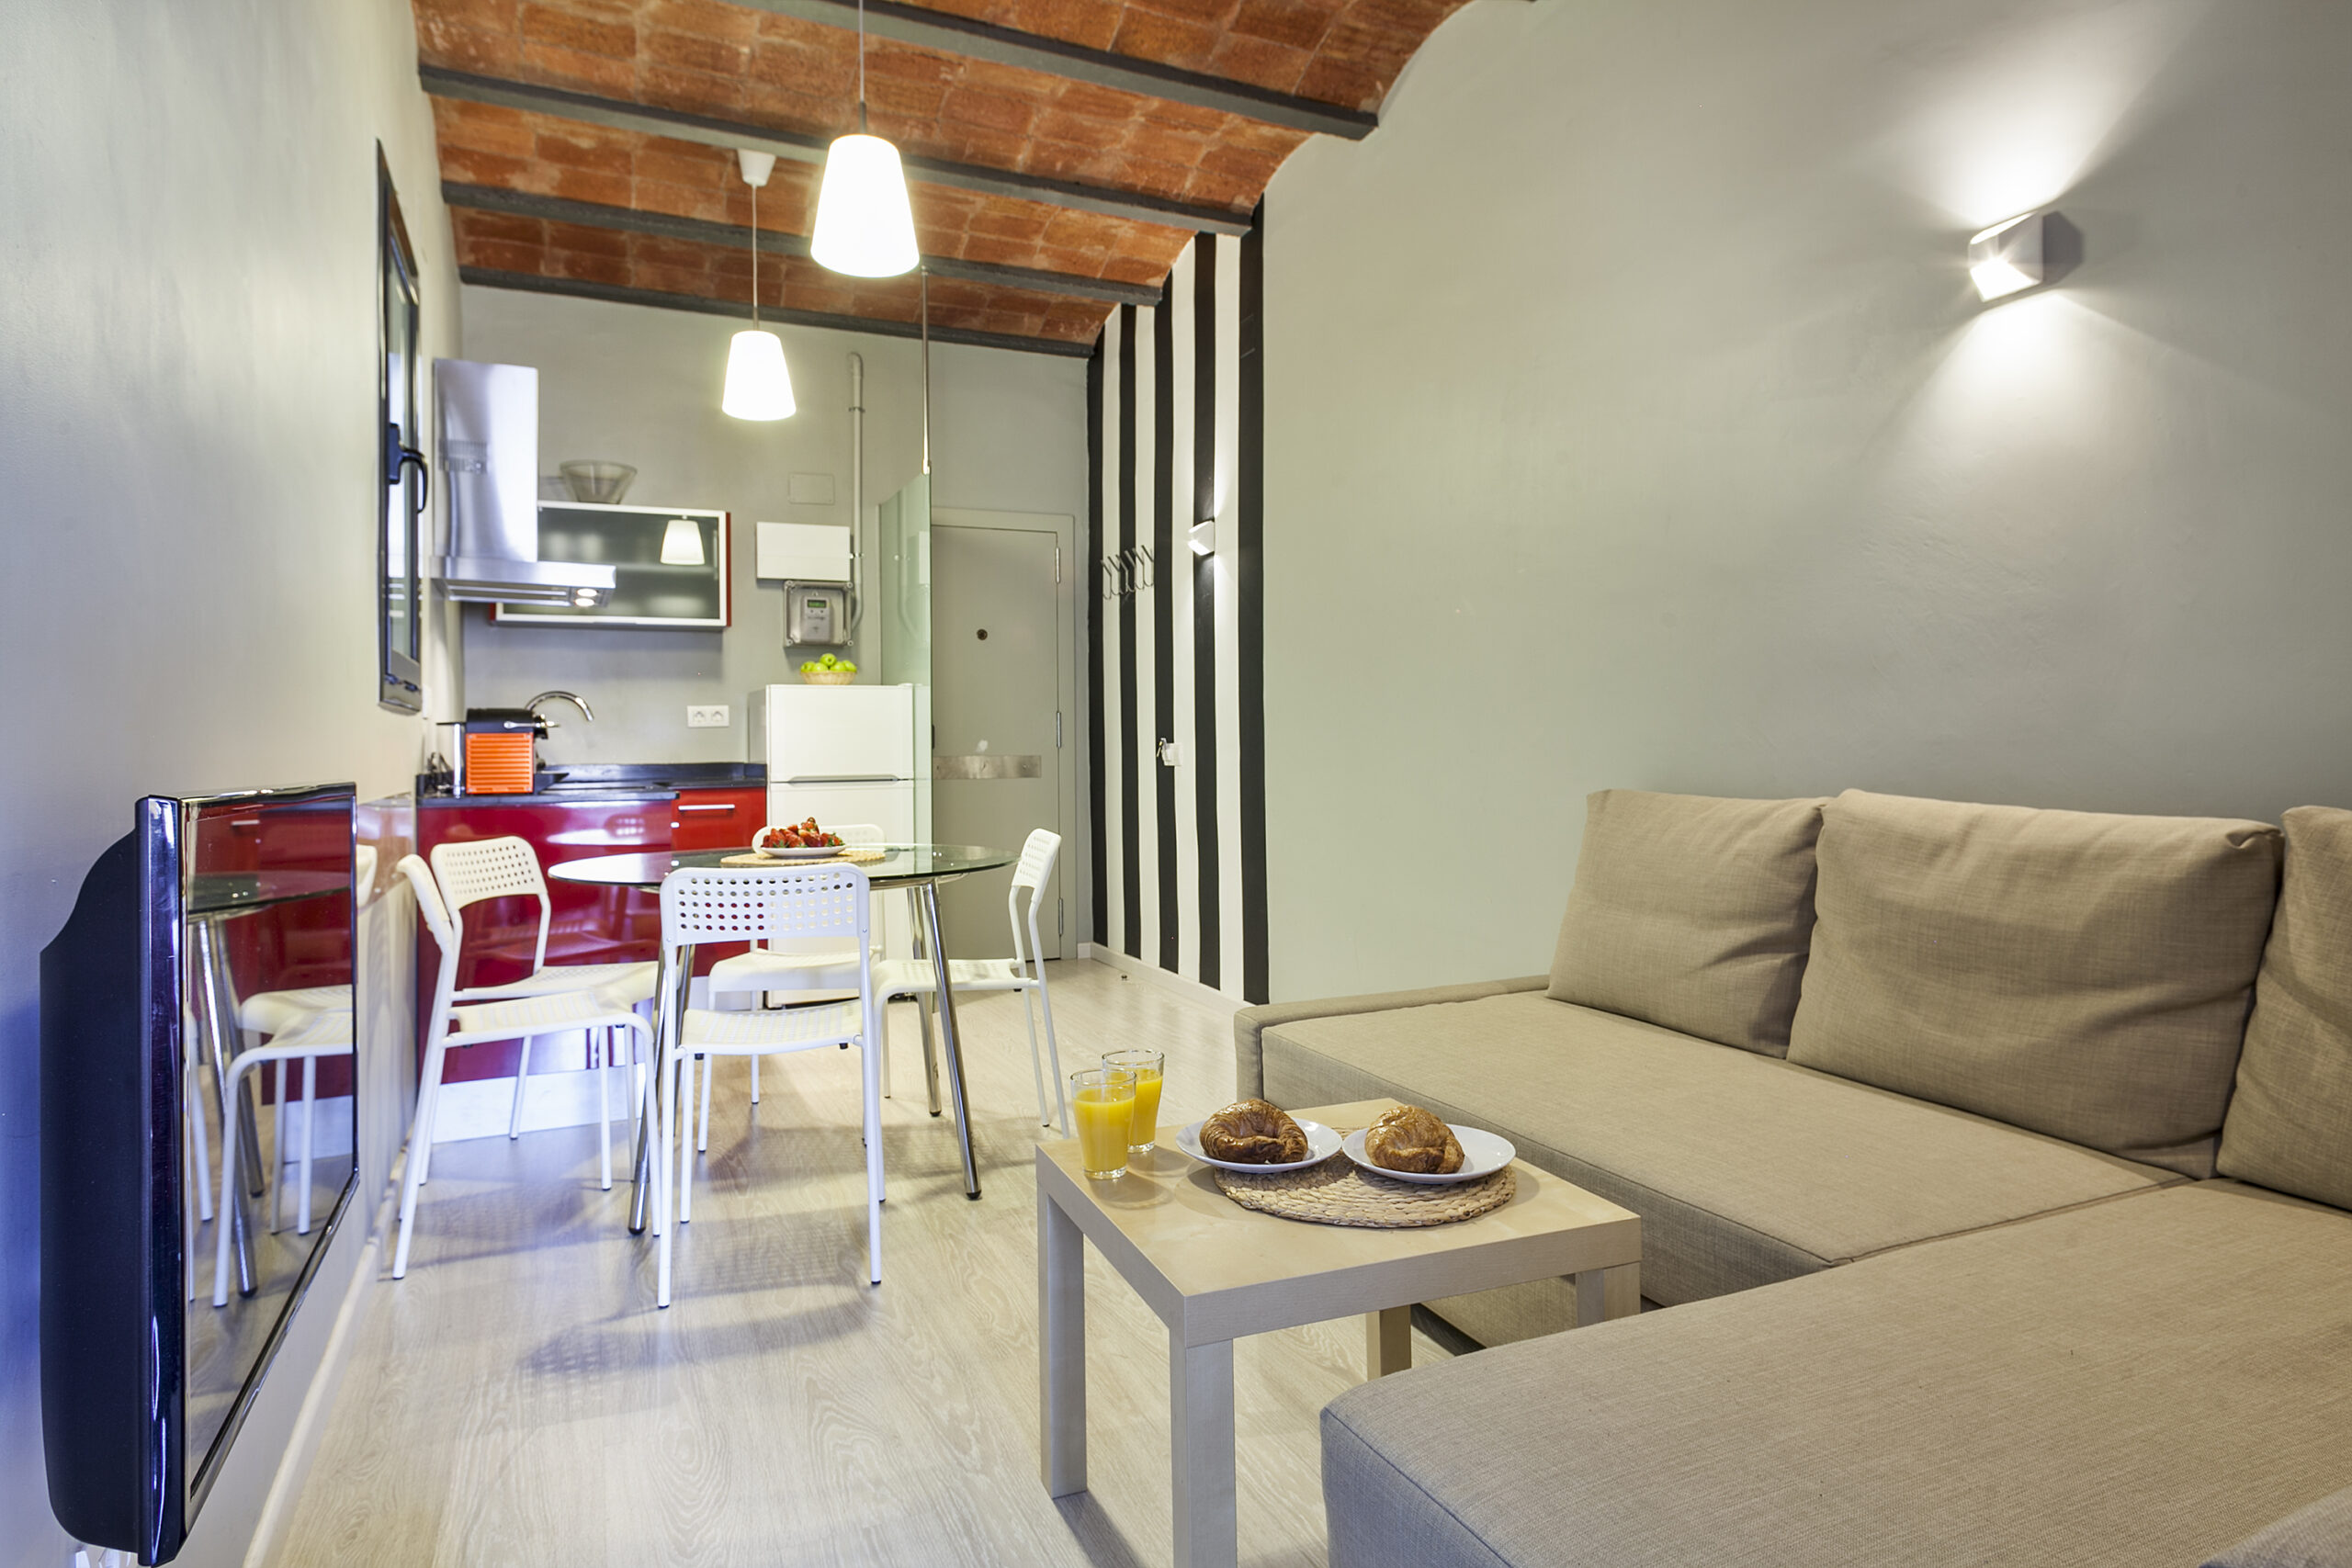 Apartment to rent in Fira Barcelona by MyRentalHost